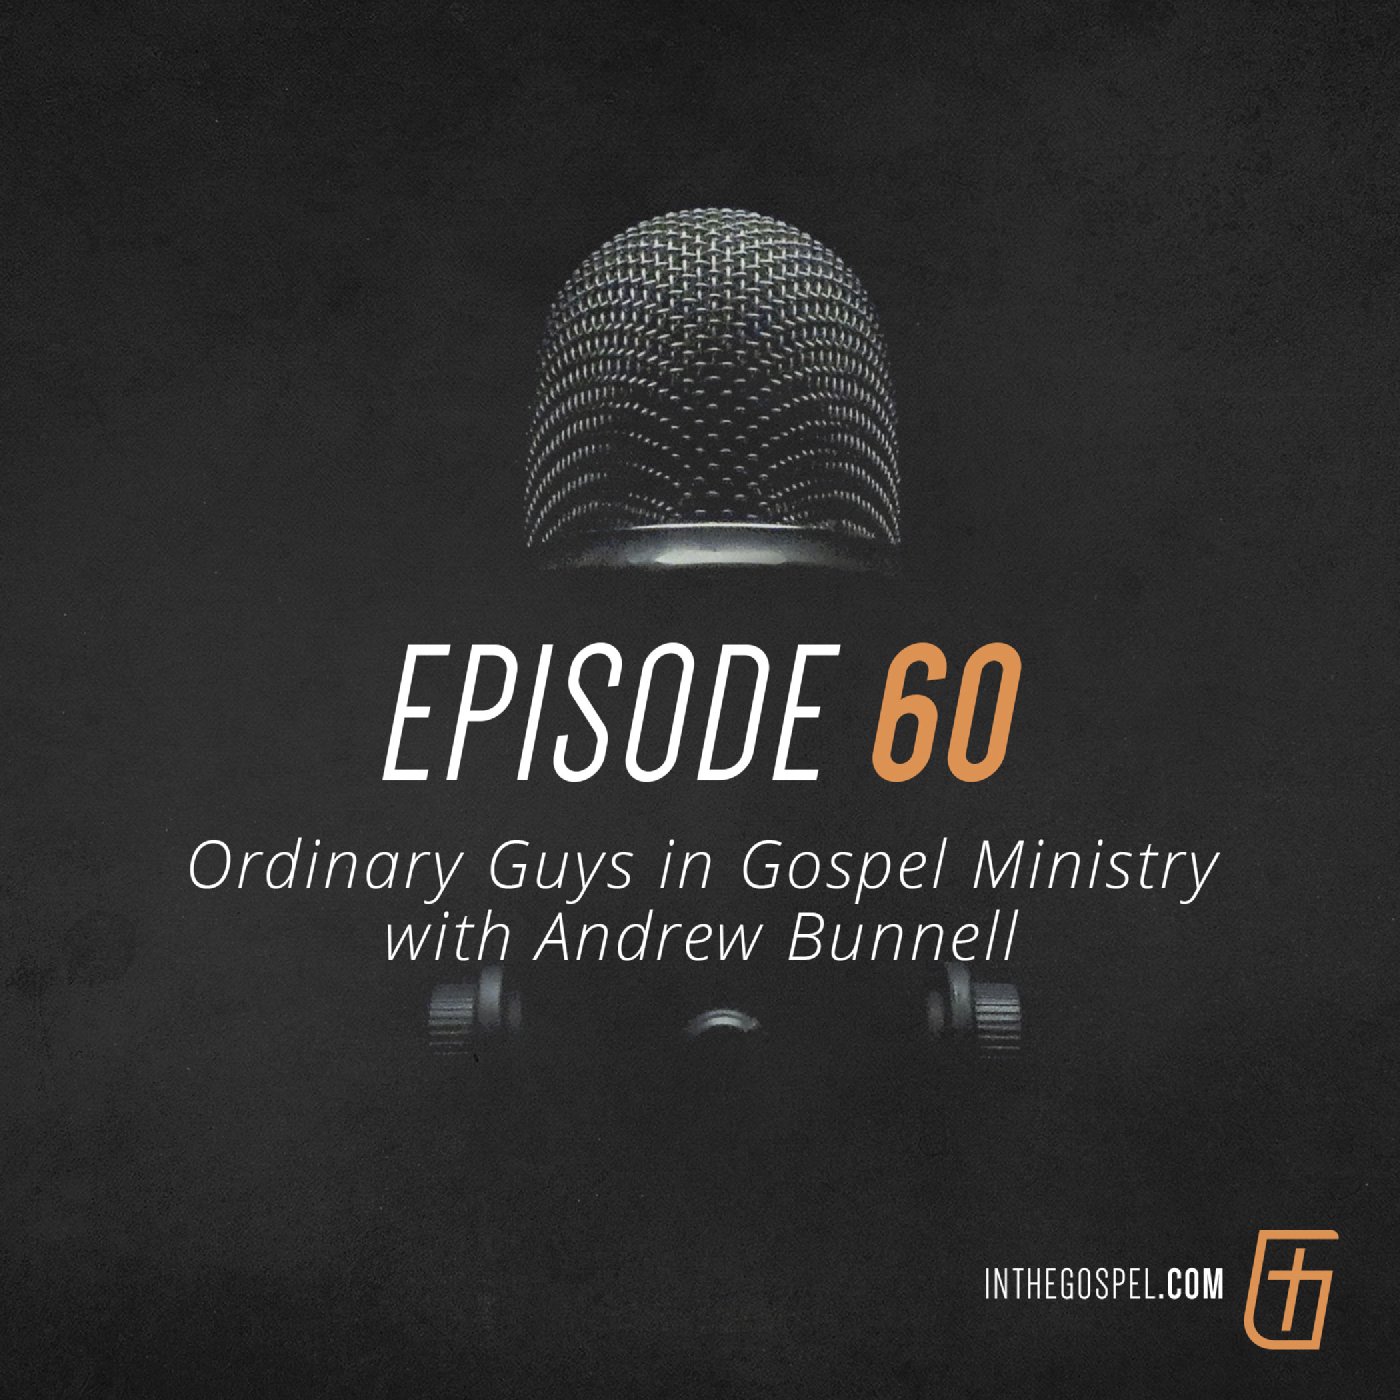 Episode 60: Ordinary Guys in Gospel Ministry with Andrew Bunnell